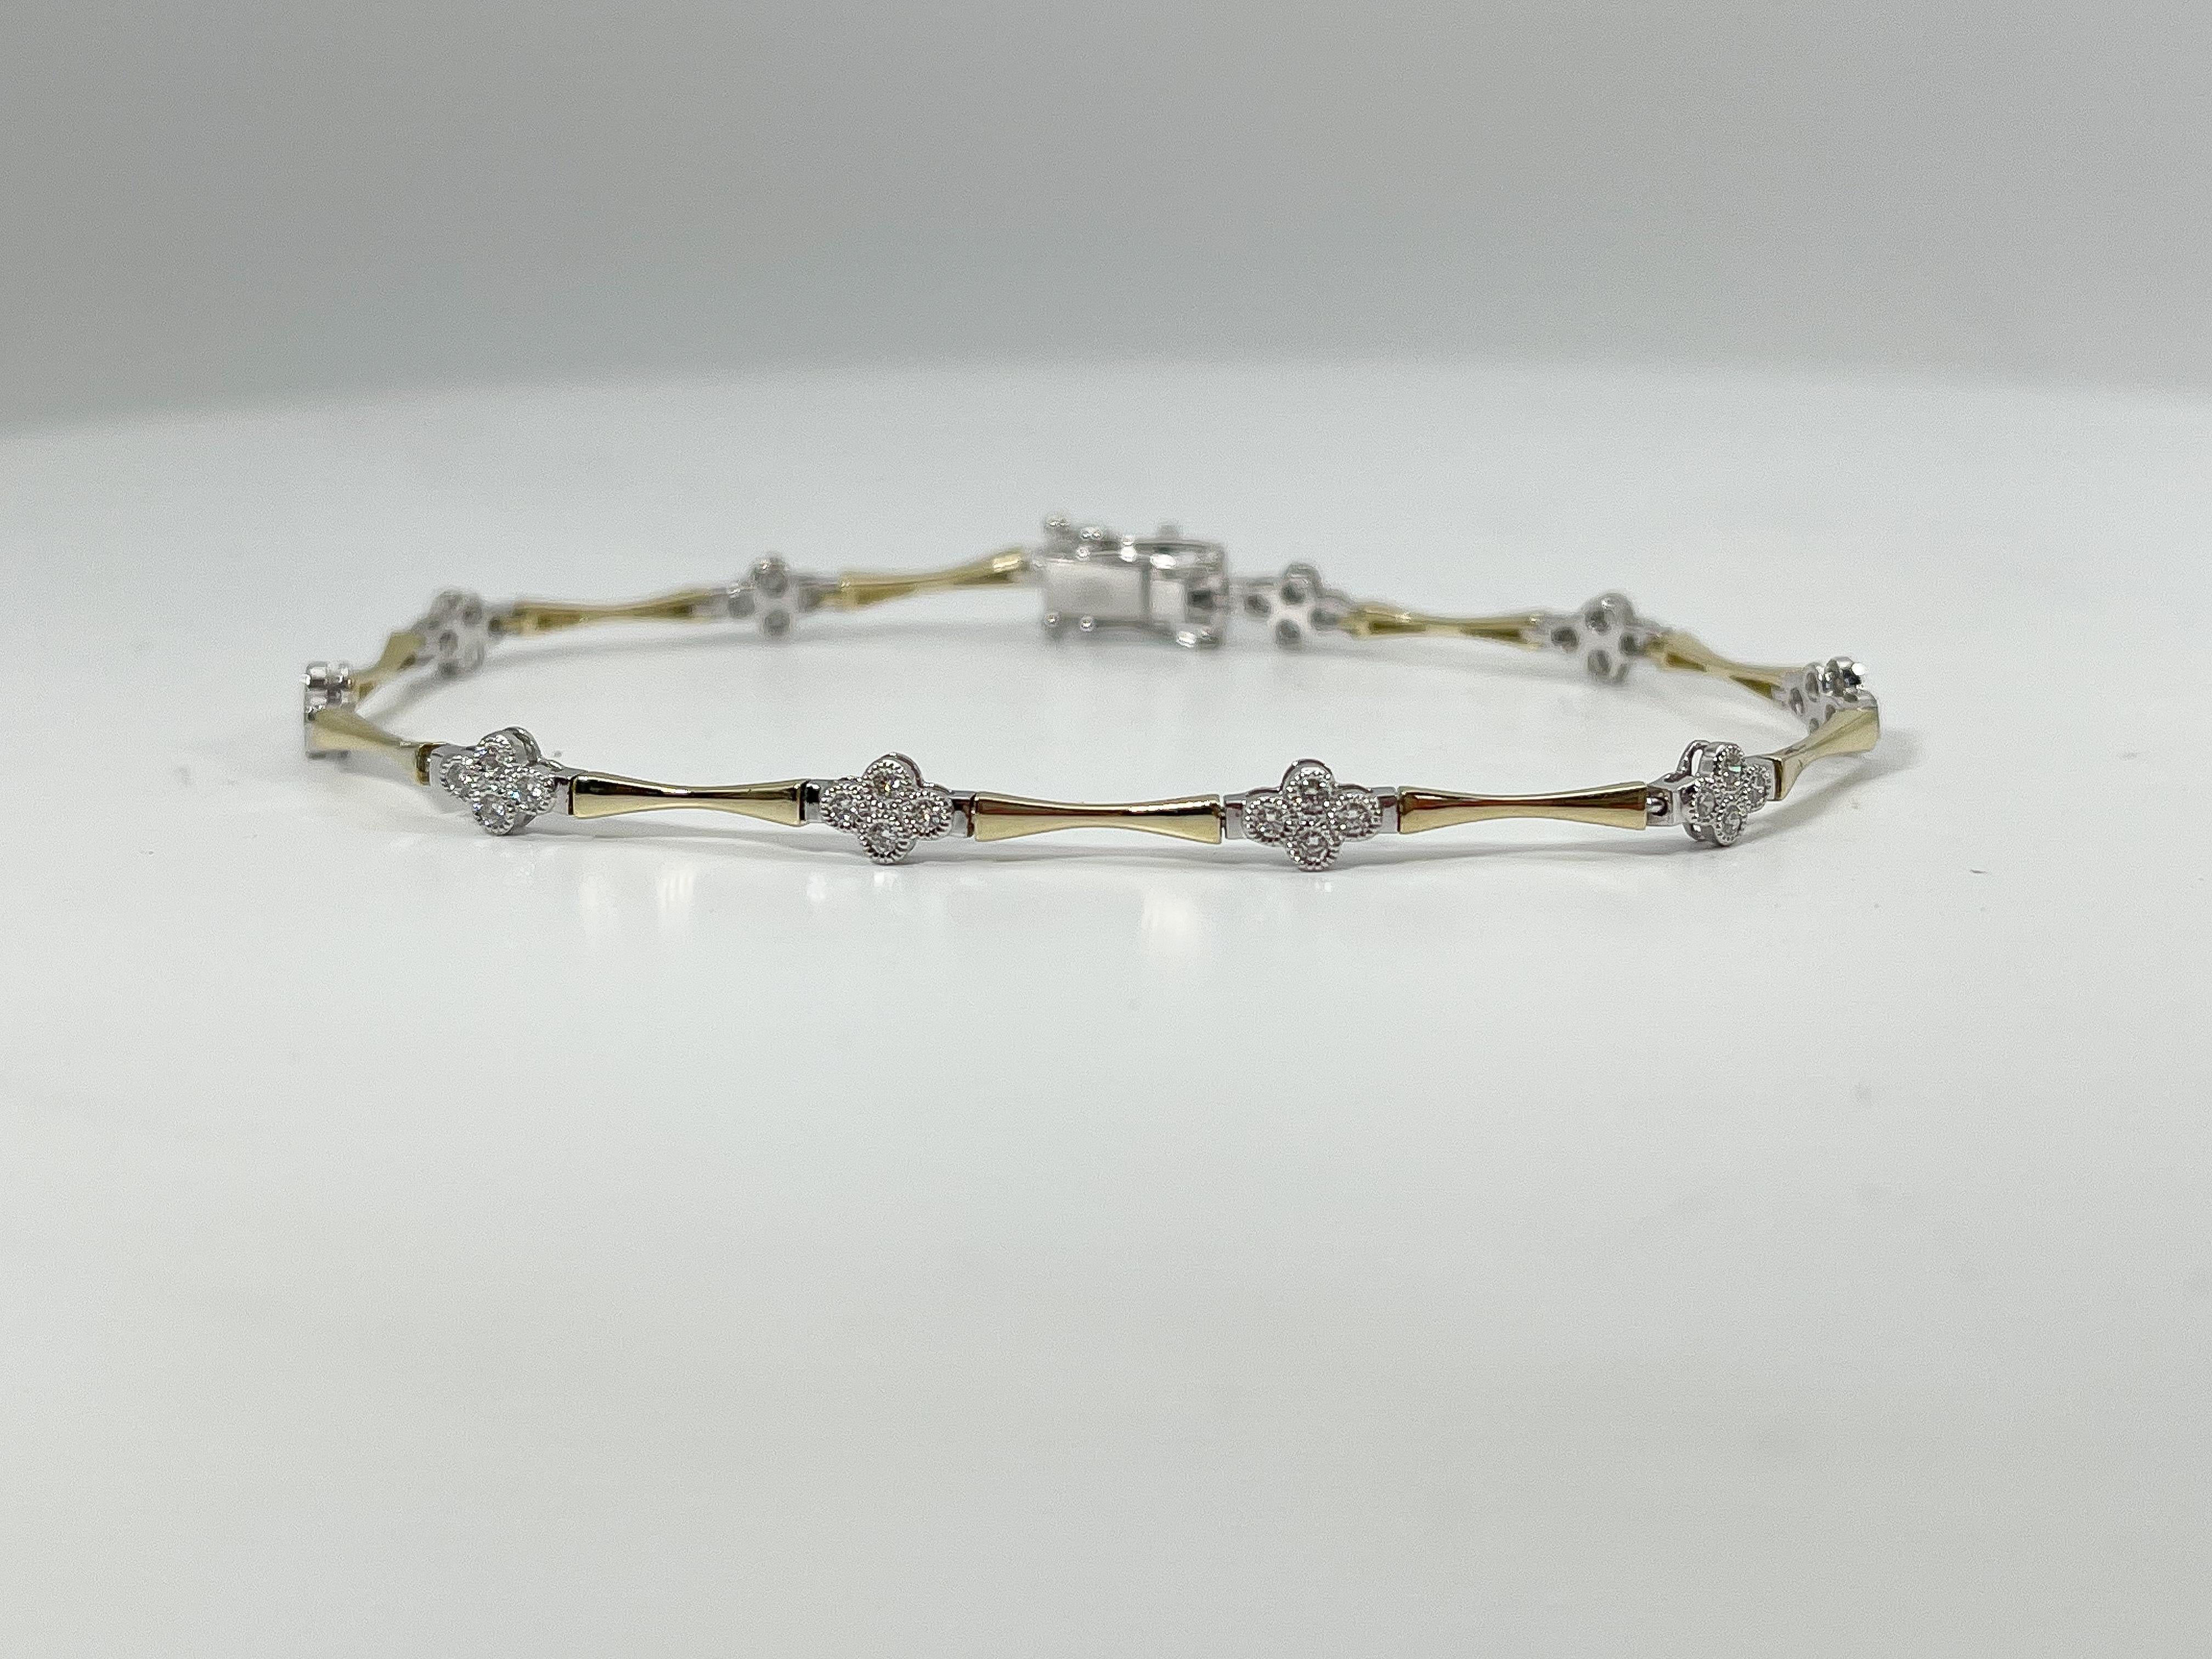 Zeghani 14k two toned .54 CTW diamond bracelet. The diamonds in this bracelet are all round, has a figure 8 clasp to open and close, the length of the bracelet is 7 inches, has a width of 4.2 mm, and it has a total weight of 5.6 grams. 